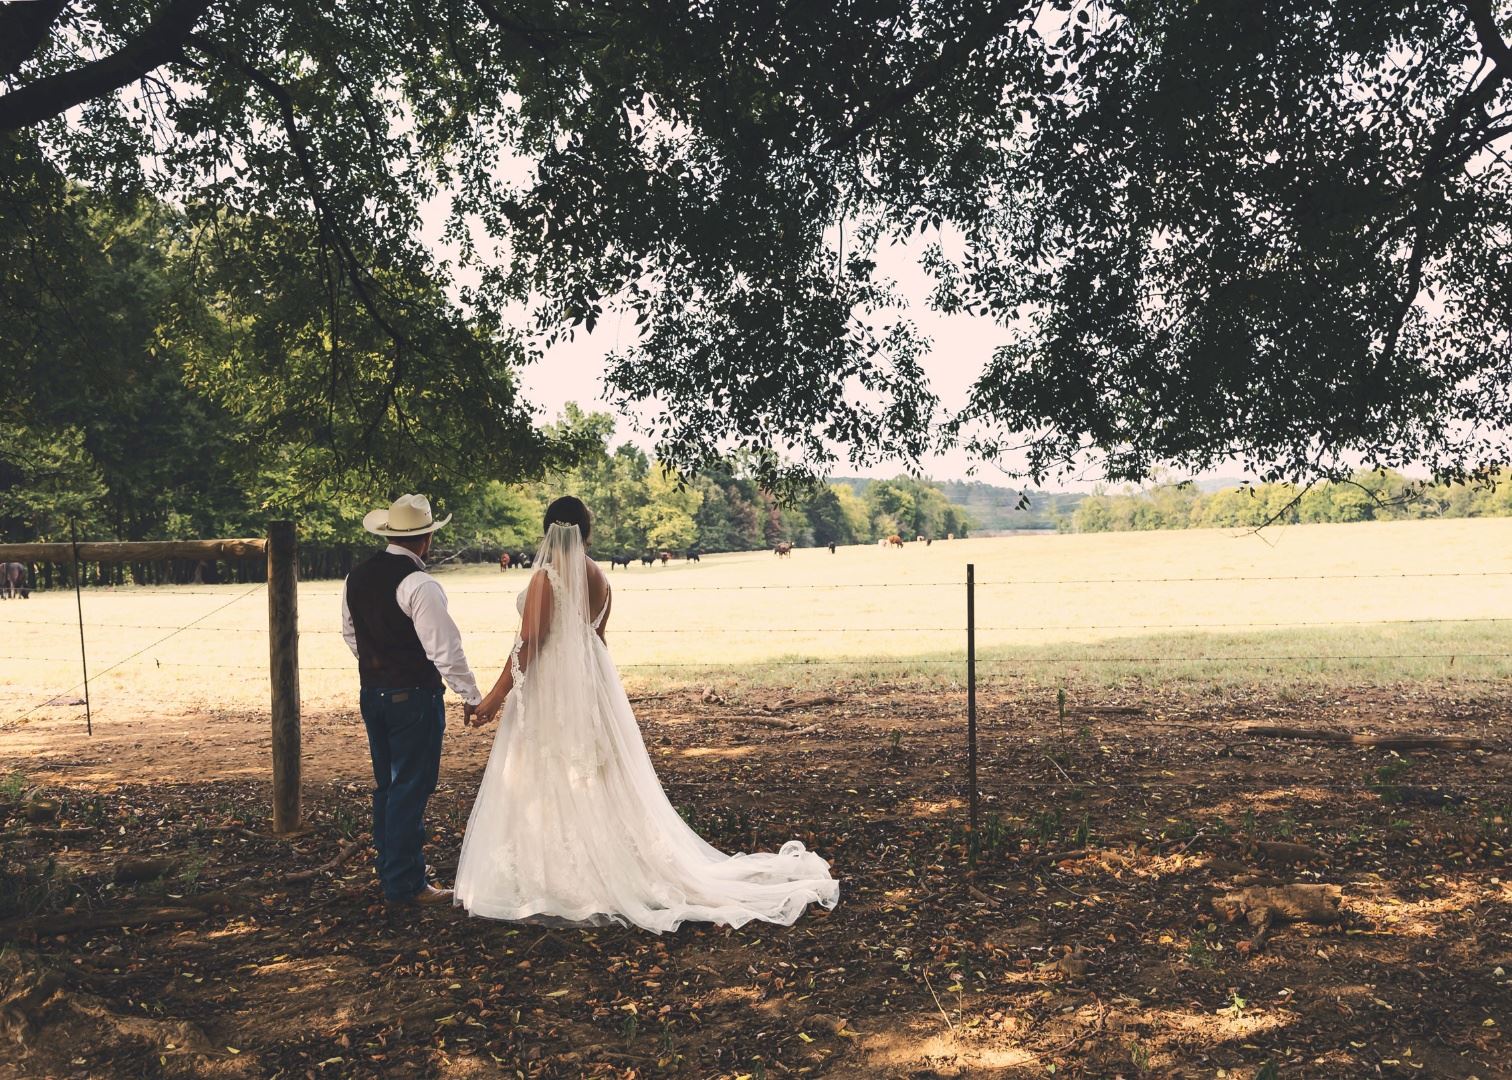 Ranch wedding country bride groom in jeans cowboy boots